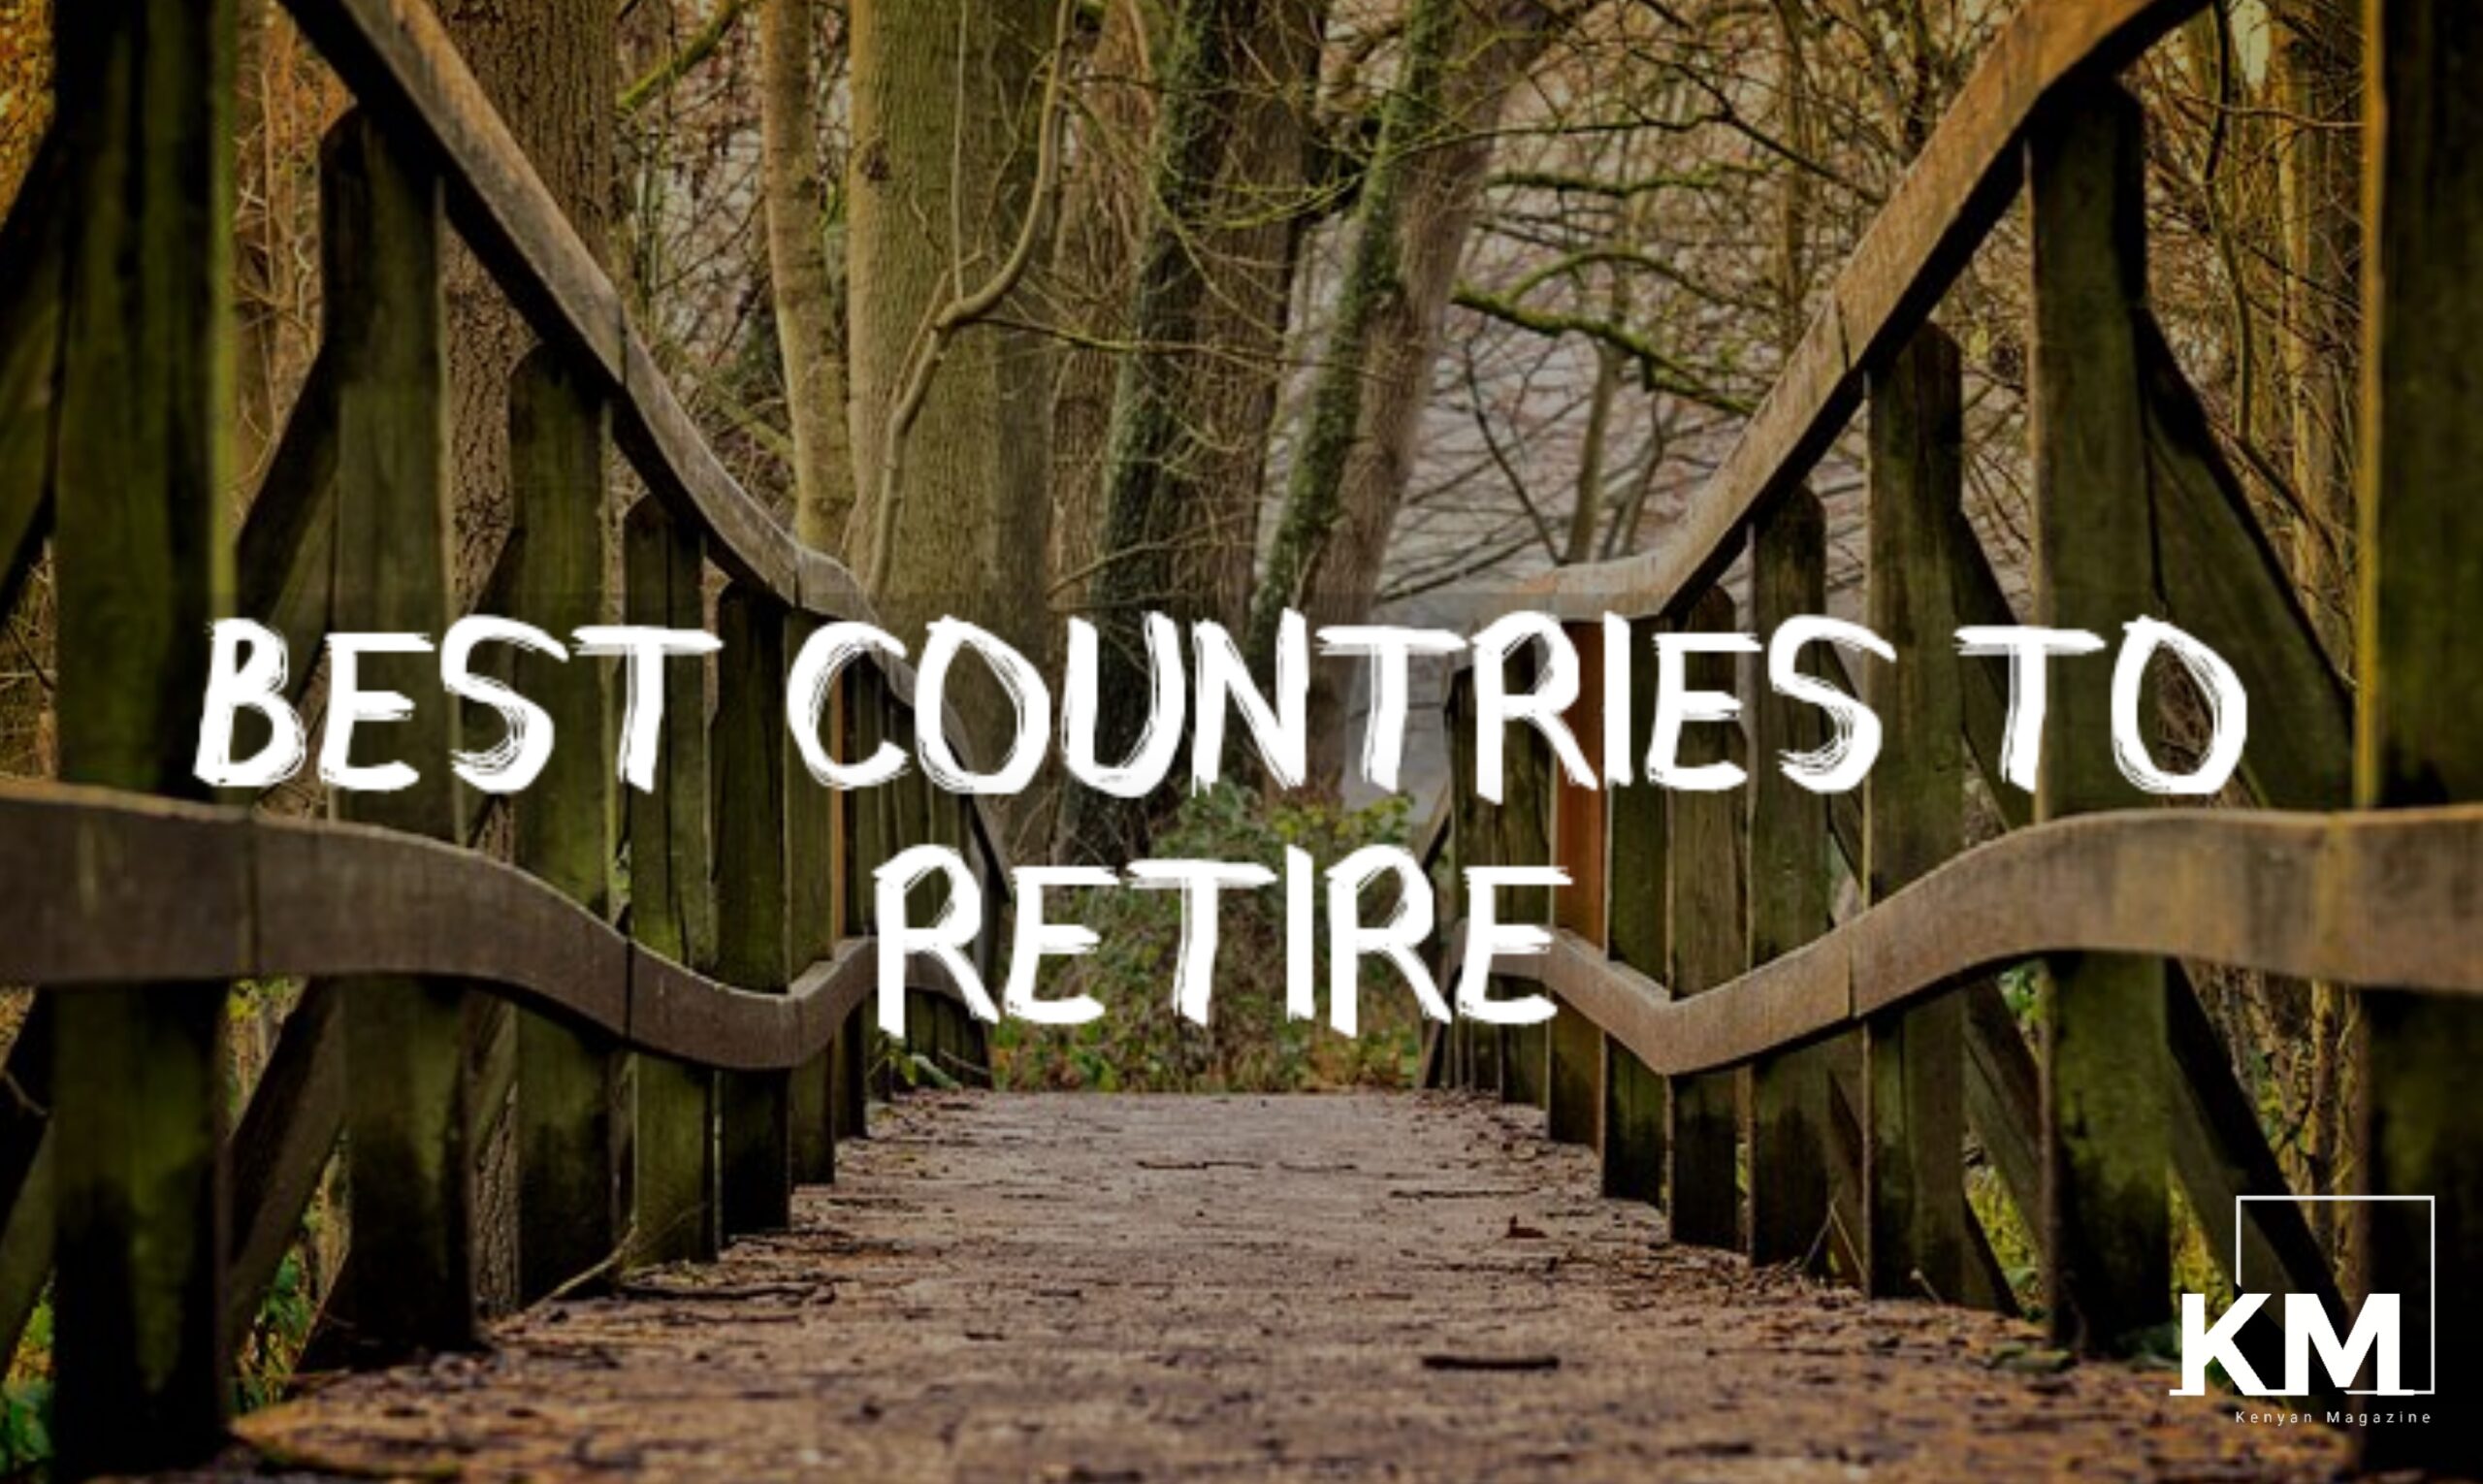 Best countries to retire